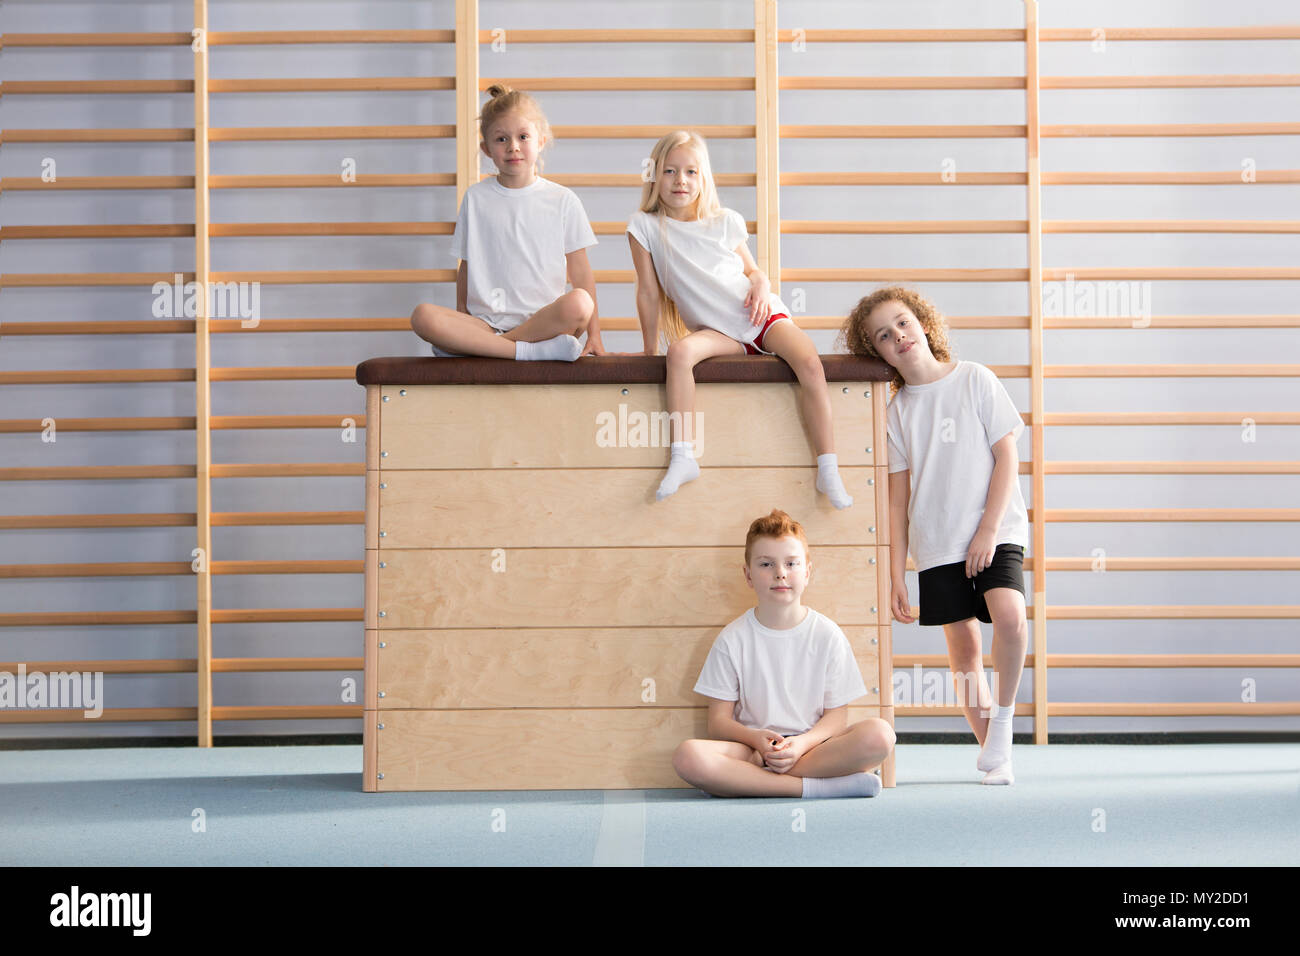 Group of young gymnasts during physical education class at school Stock Photo